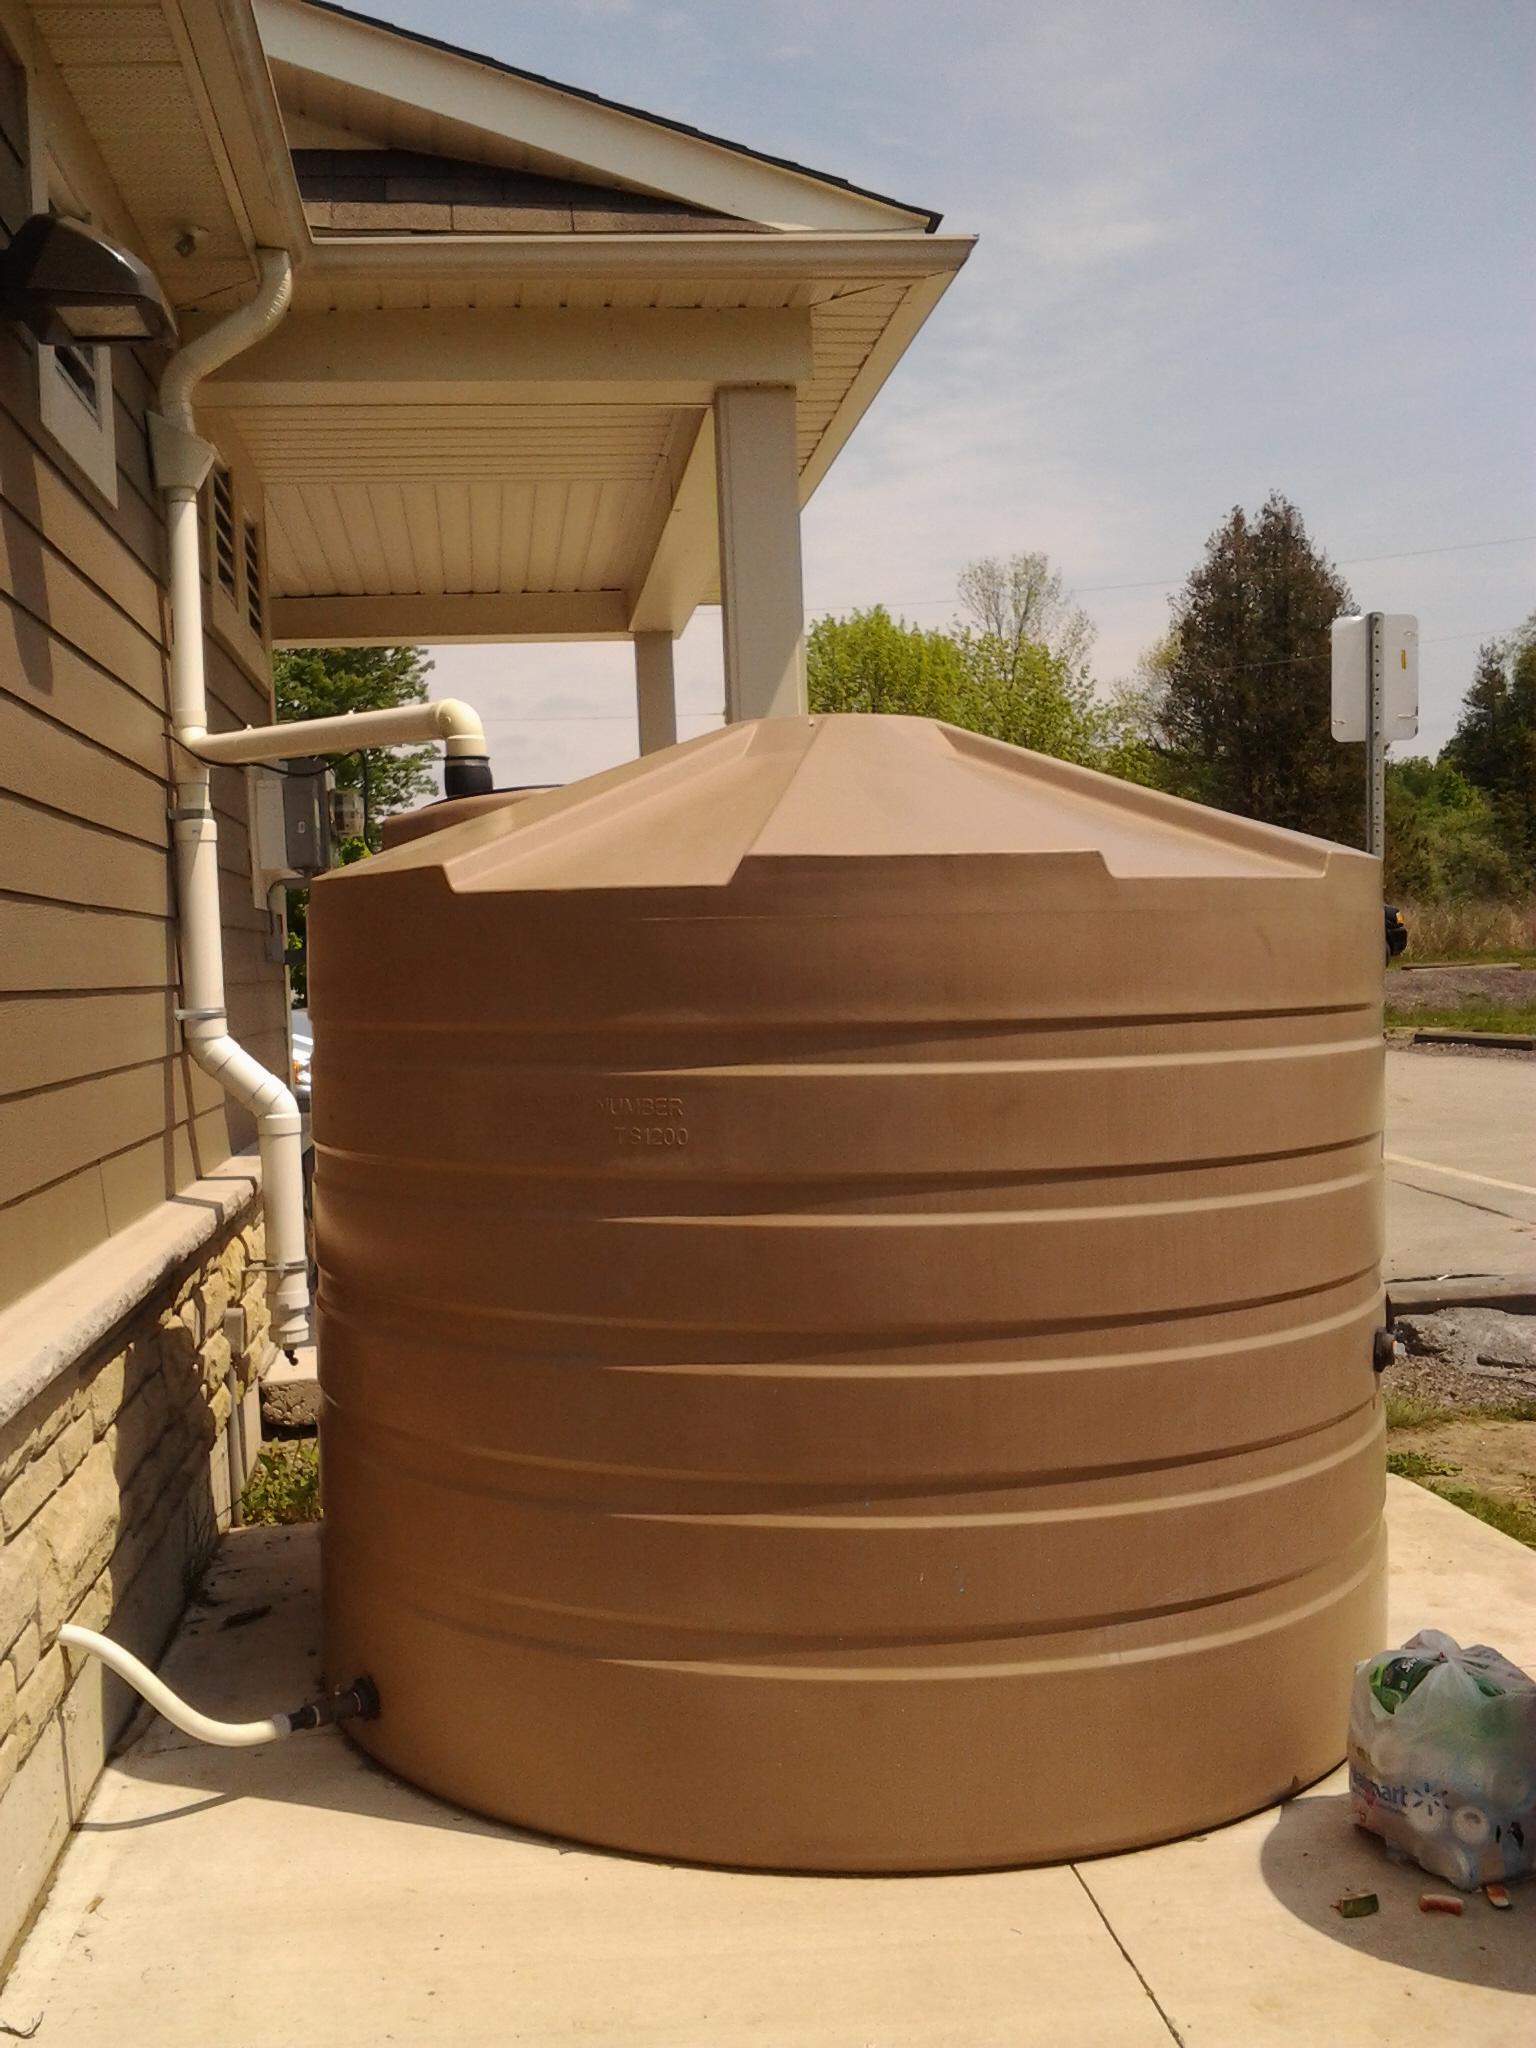 An above-ground cistern. This system is not frost proof, and would have to be drained and closed during winter.